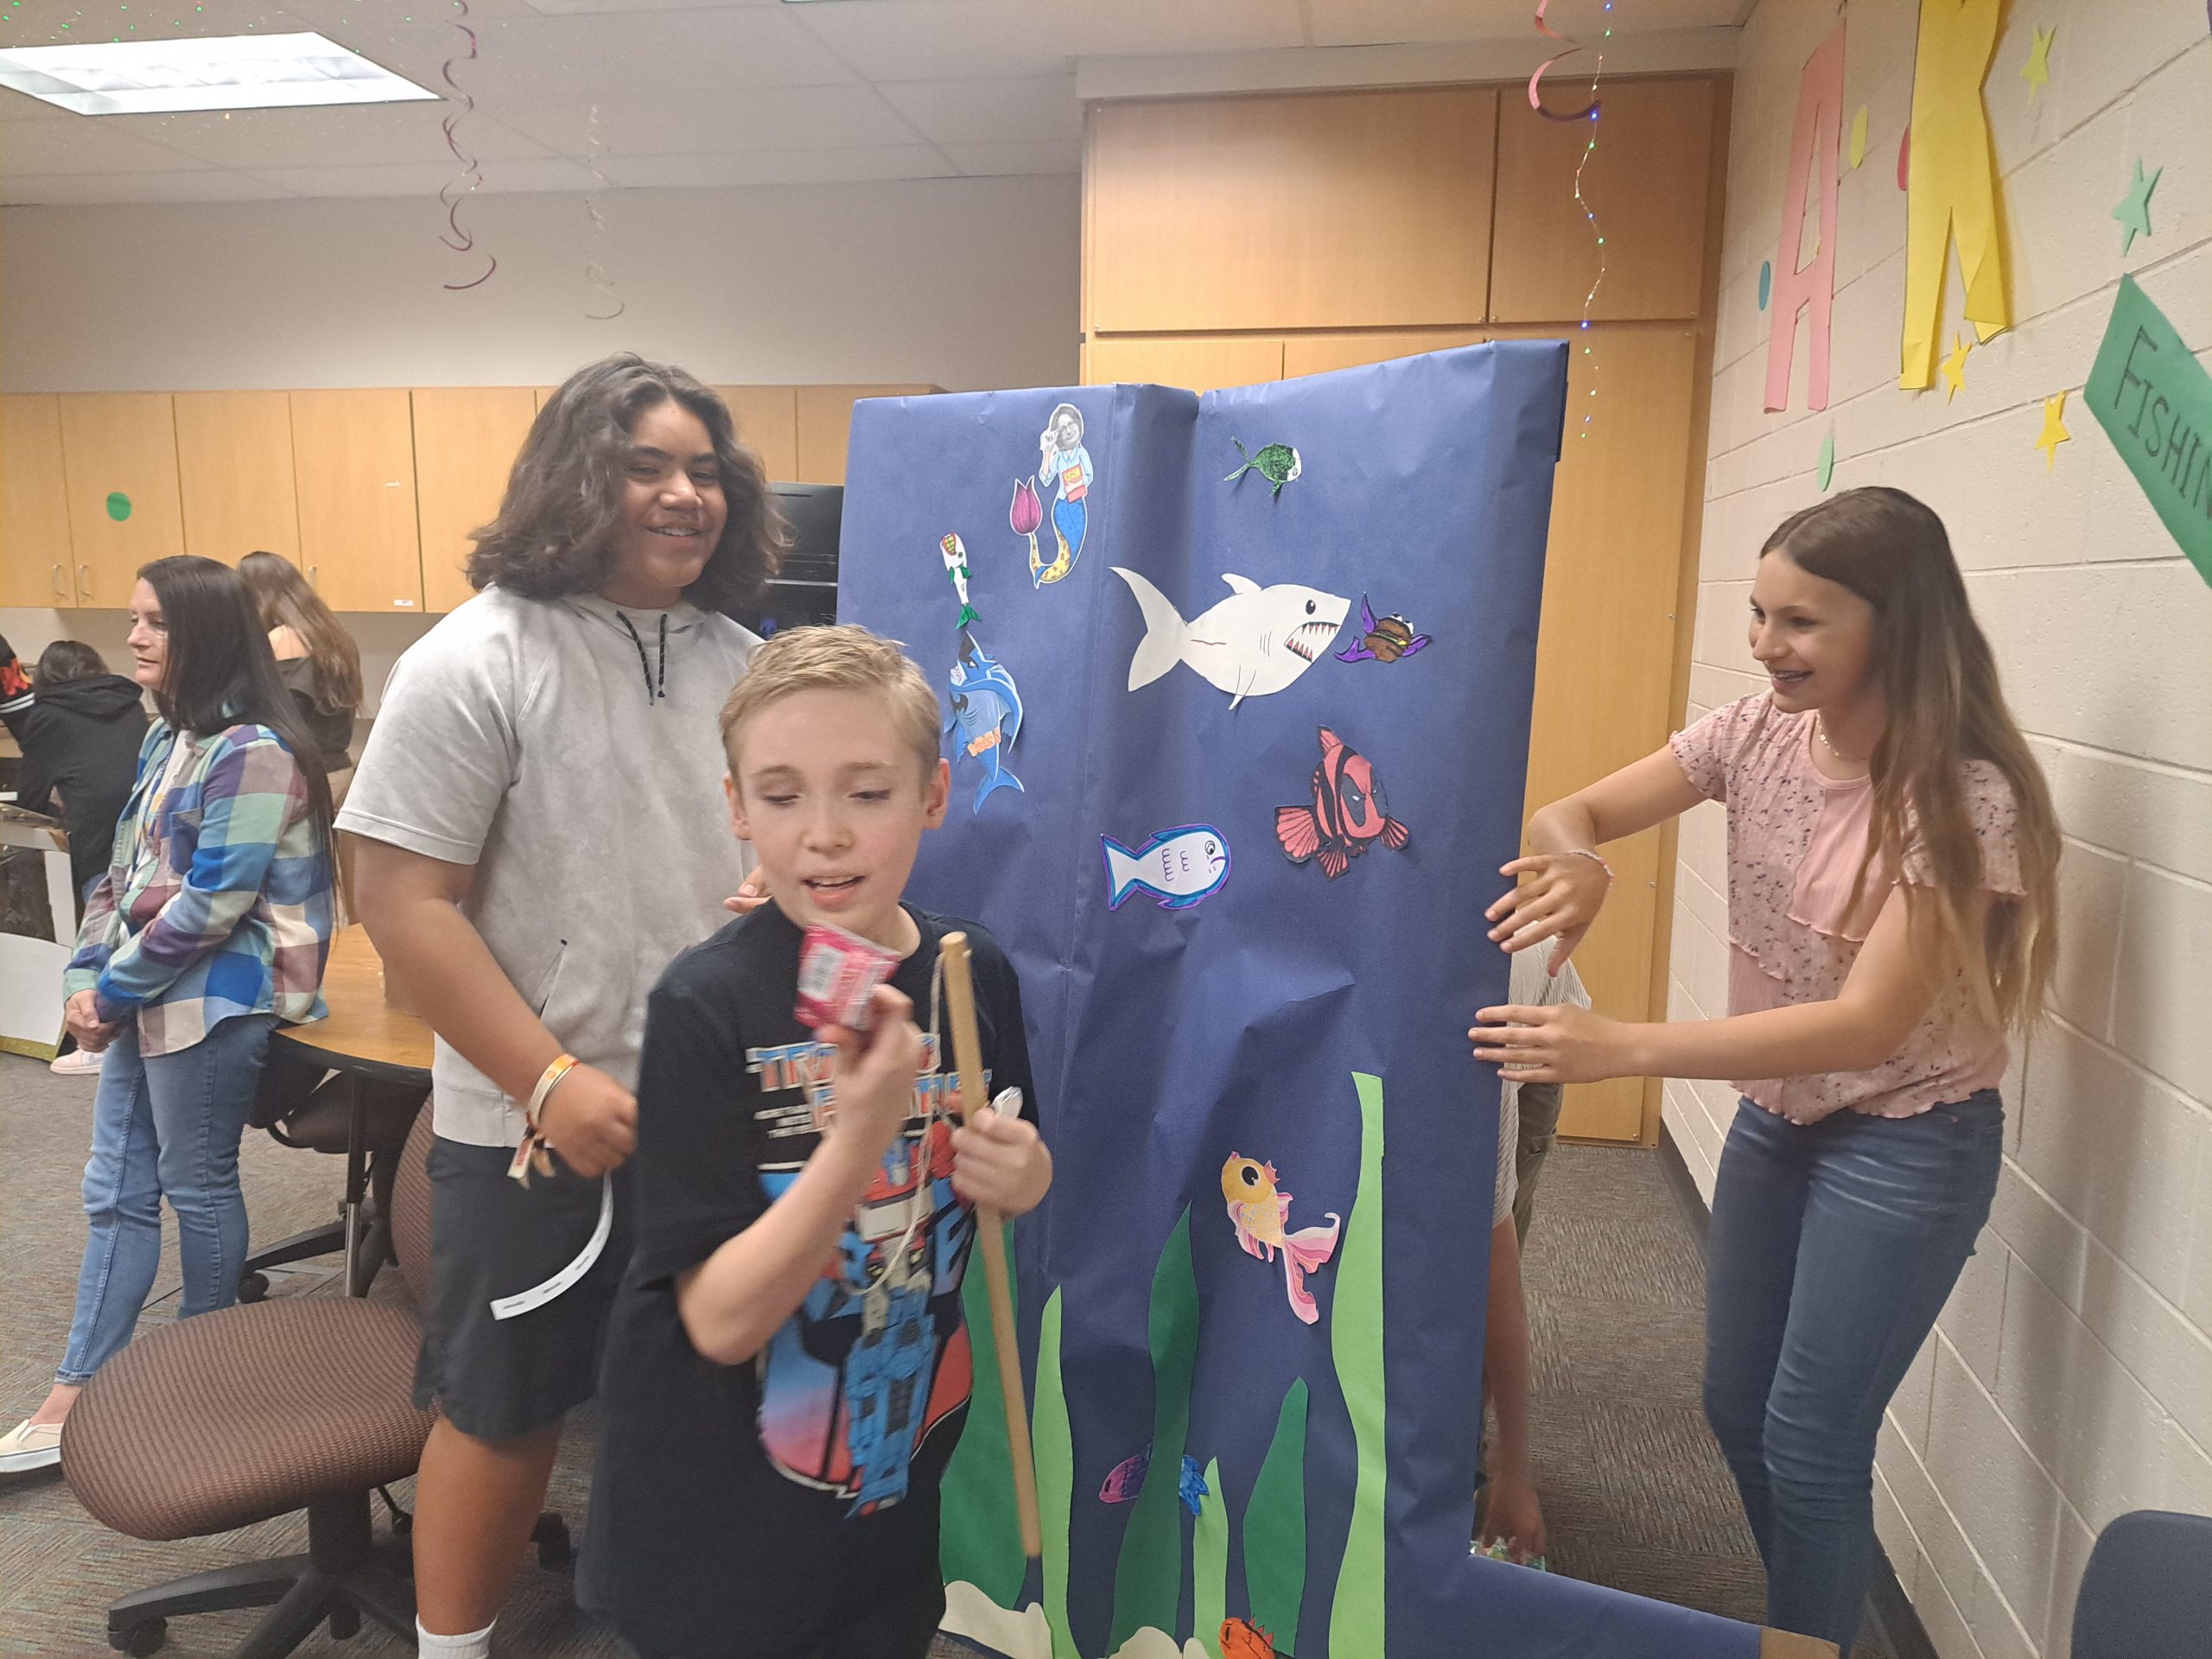 One of Ms. Miller's students examines his prize from the "Go Fish" booth while the students who created the booth look on.